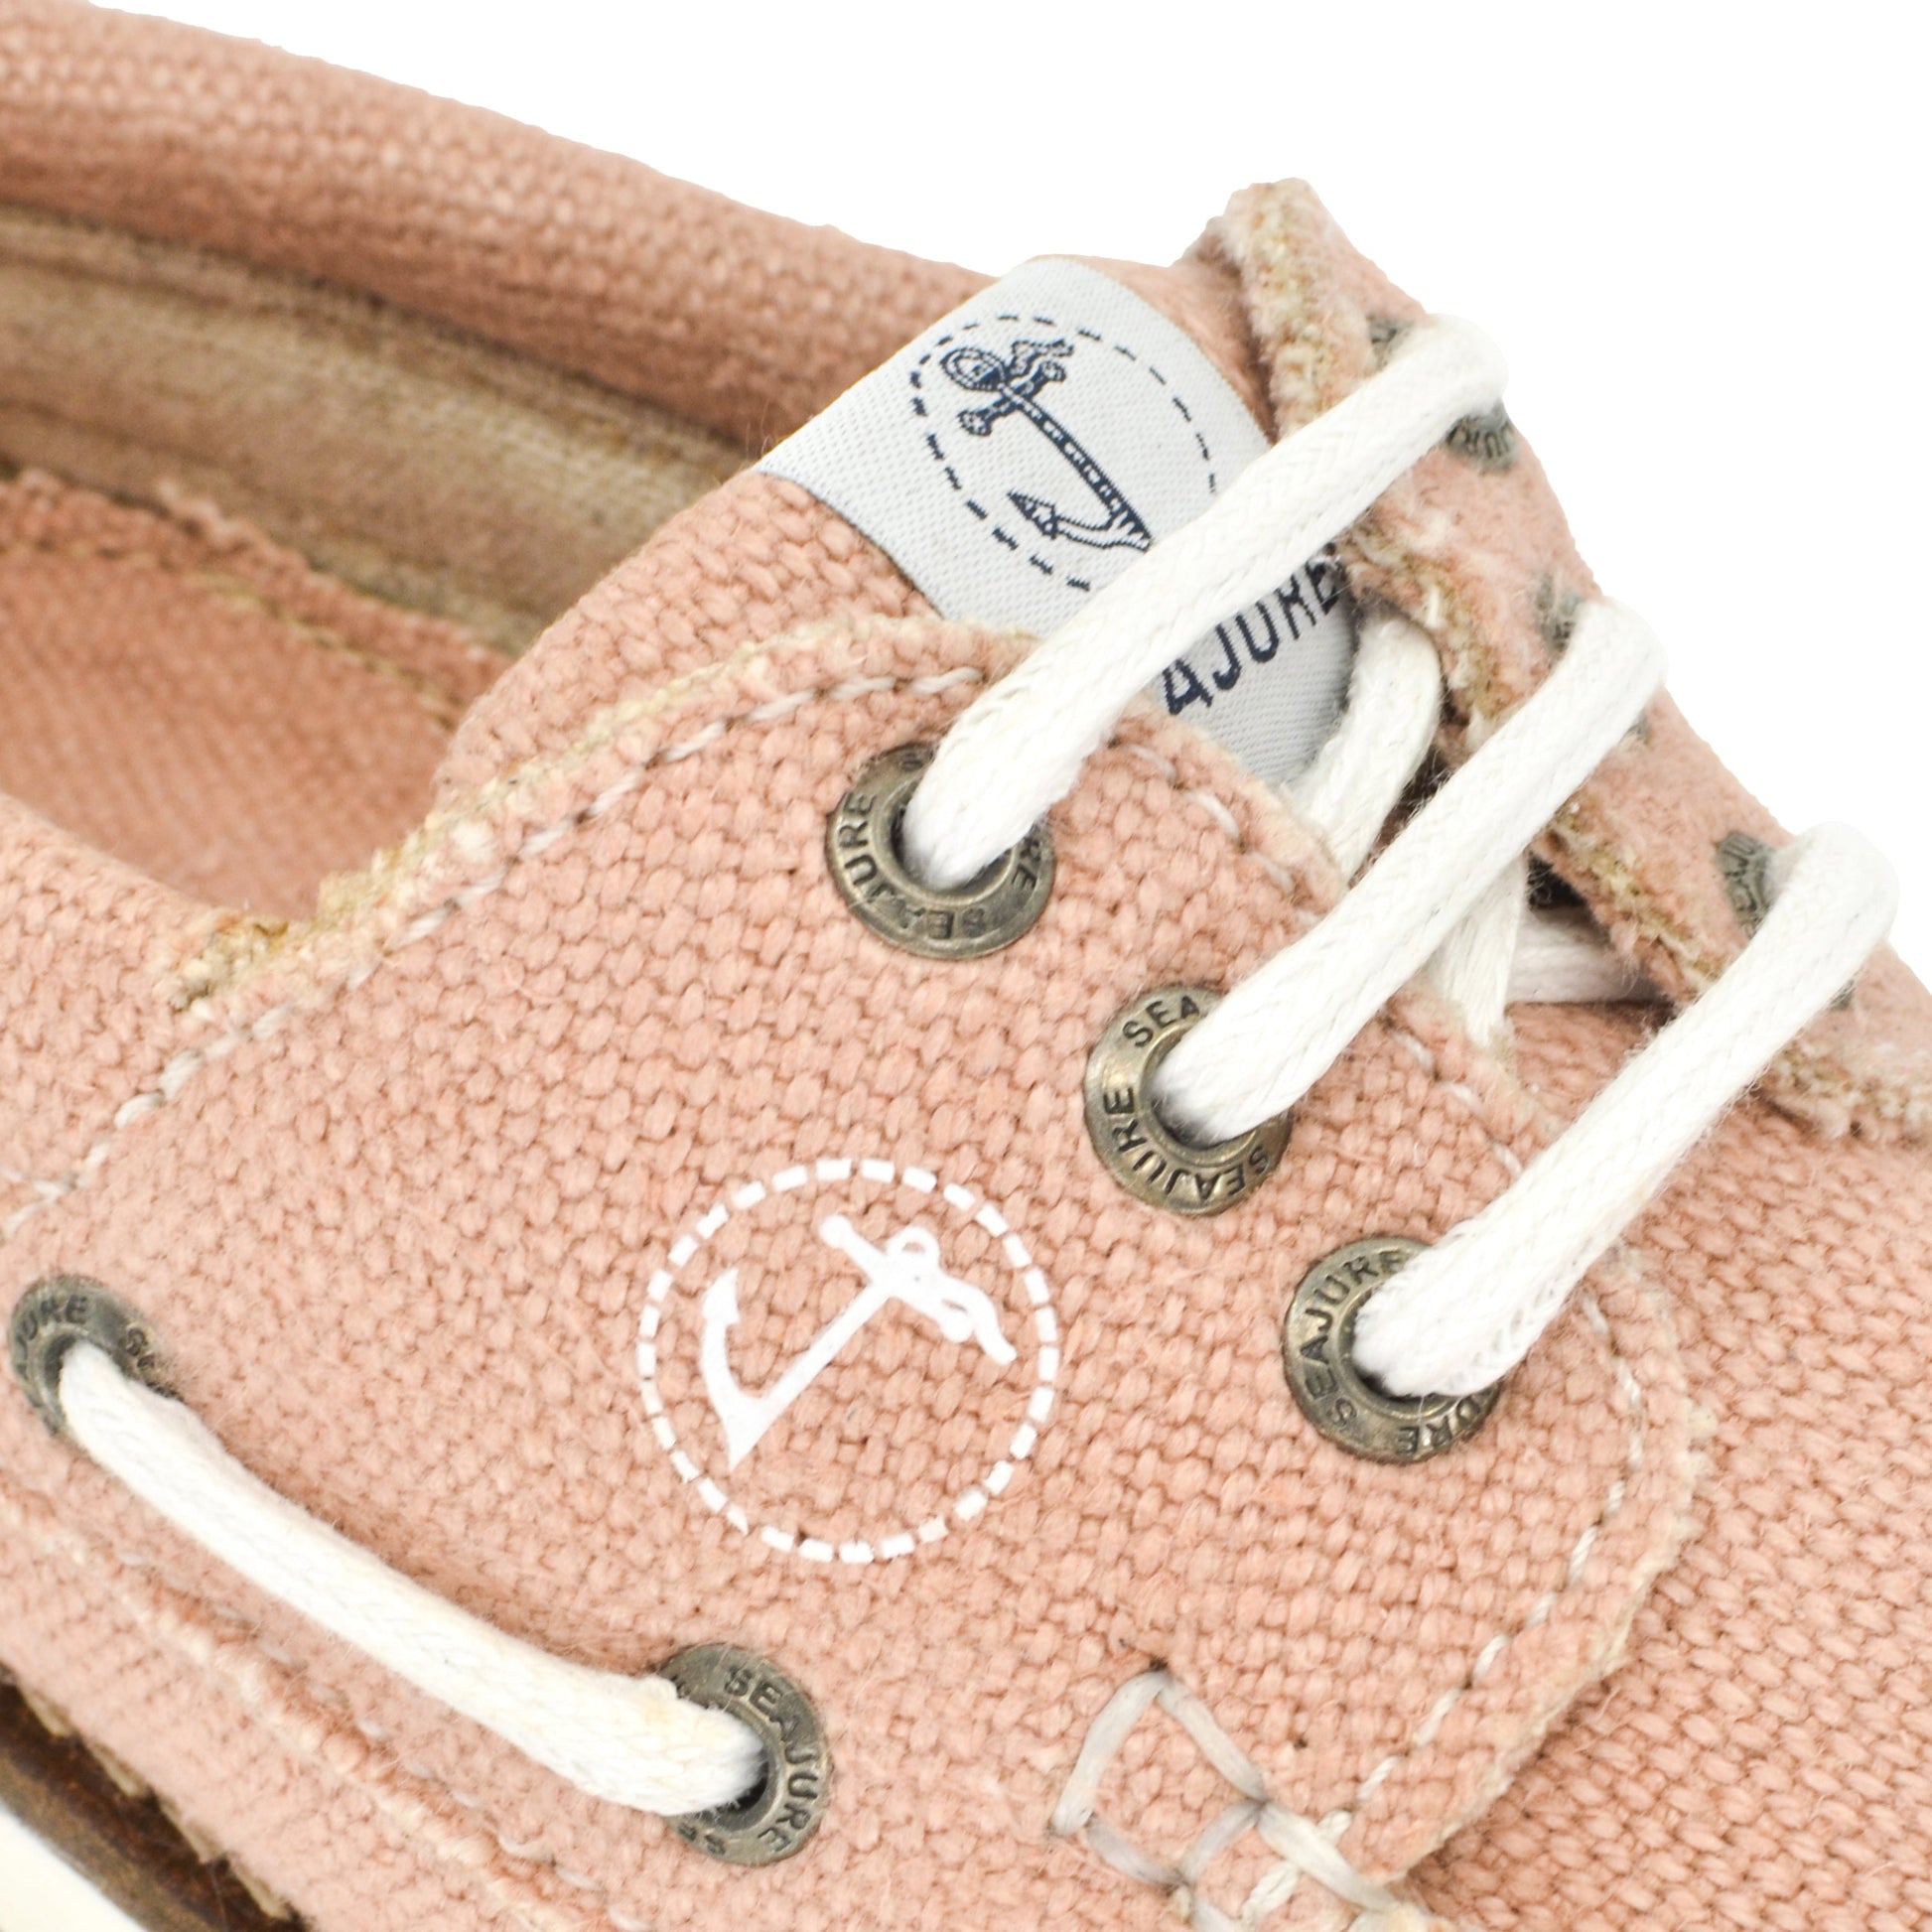 Close-up of a pink canvas sneaker made from premium hemp, with white laces and metal eyelets, showing a worn texture and a logo on the tongue. Women Hemp & Vegan Boat Shoe Pasjaca by Amethyst Hestia.